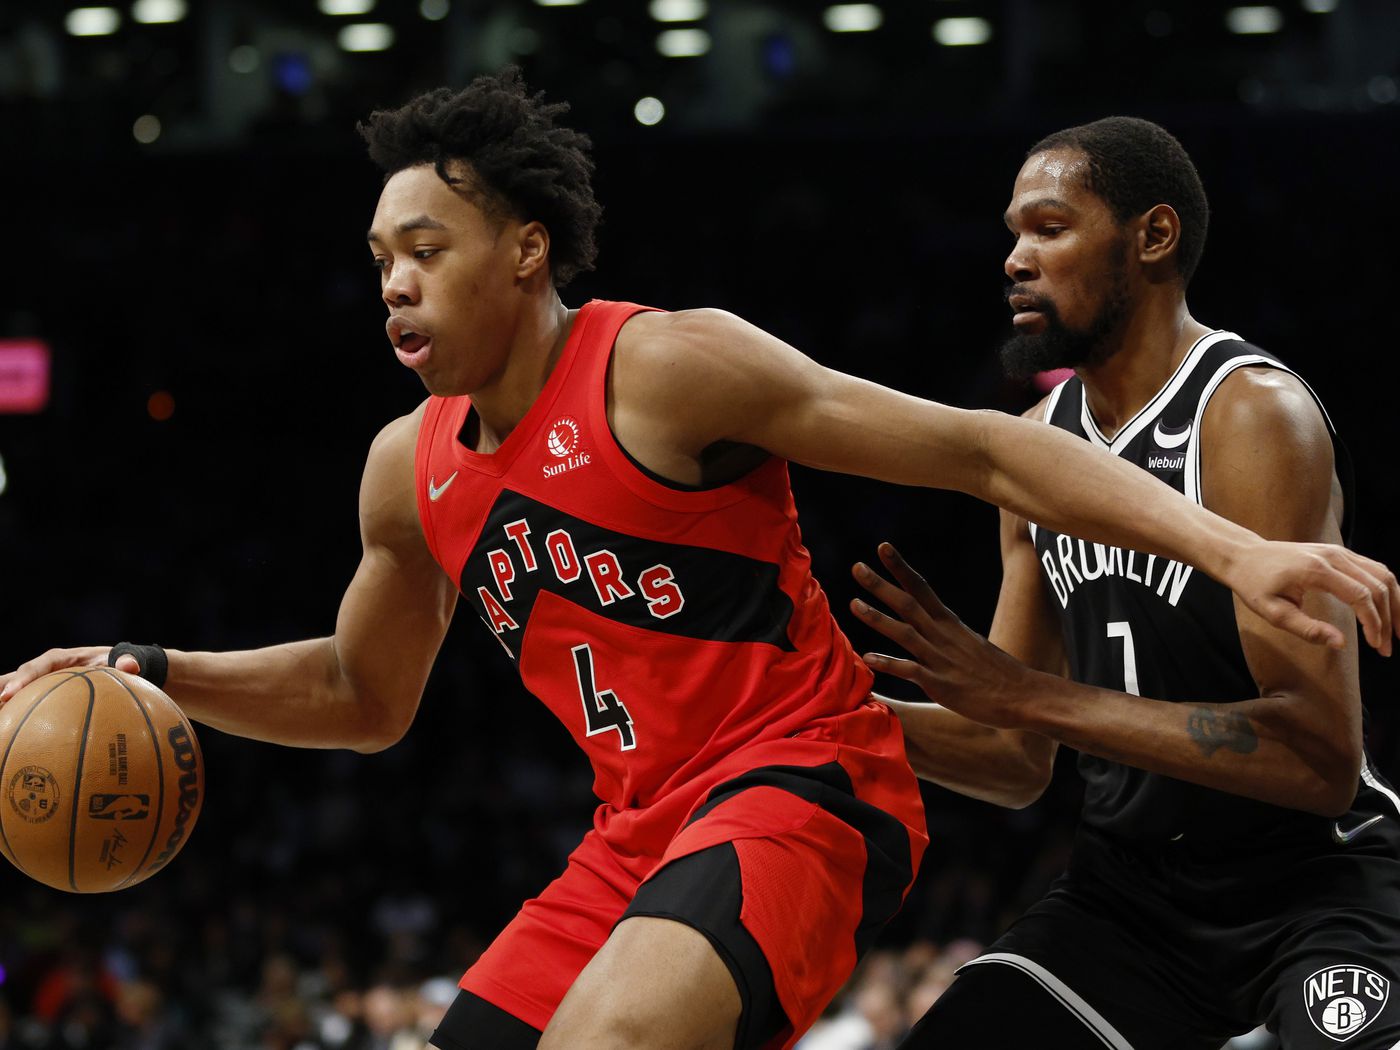 The Toronto Raptors best shot at contending right now is Kevin